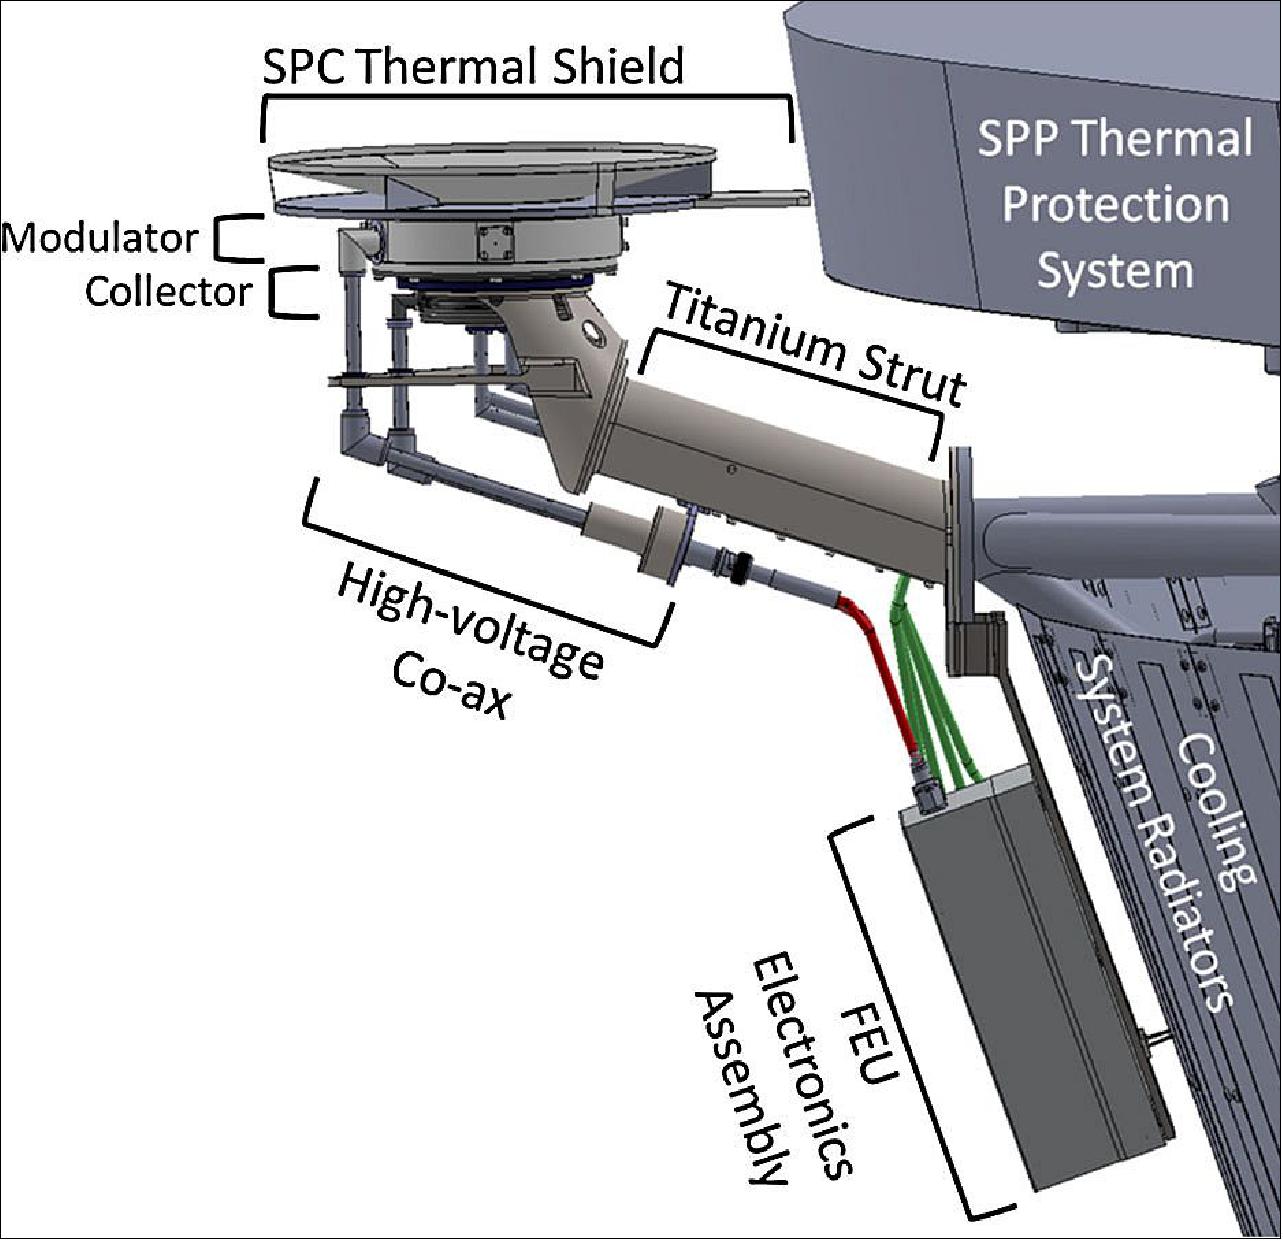 Figure 72: Layout of SPC alongside the spacecraft with key components labeled (image credit: SWEAP collaboration)